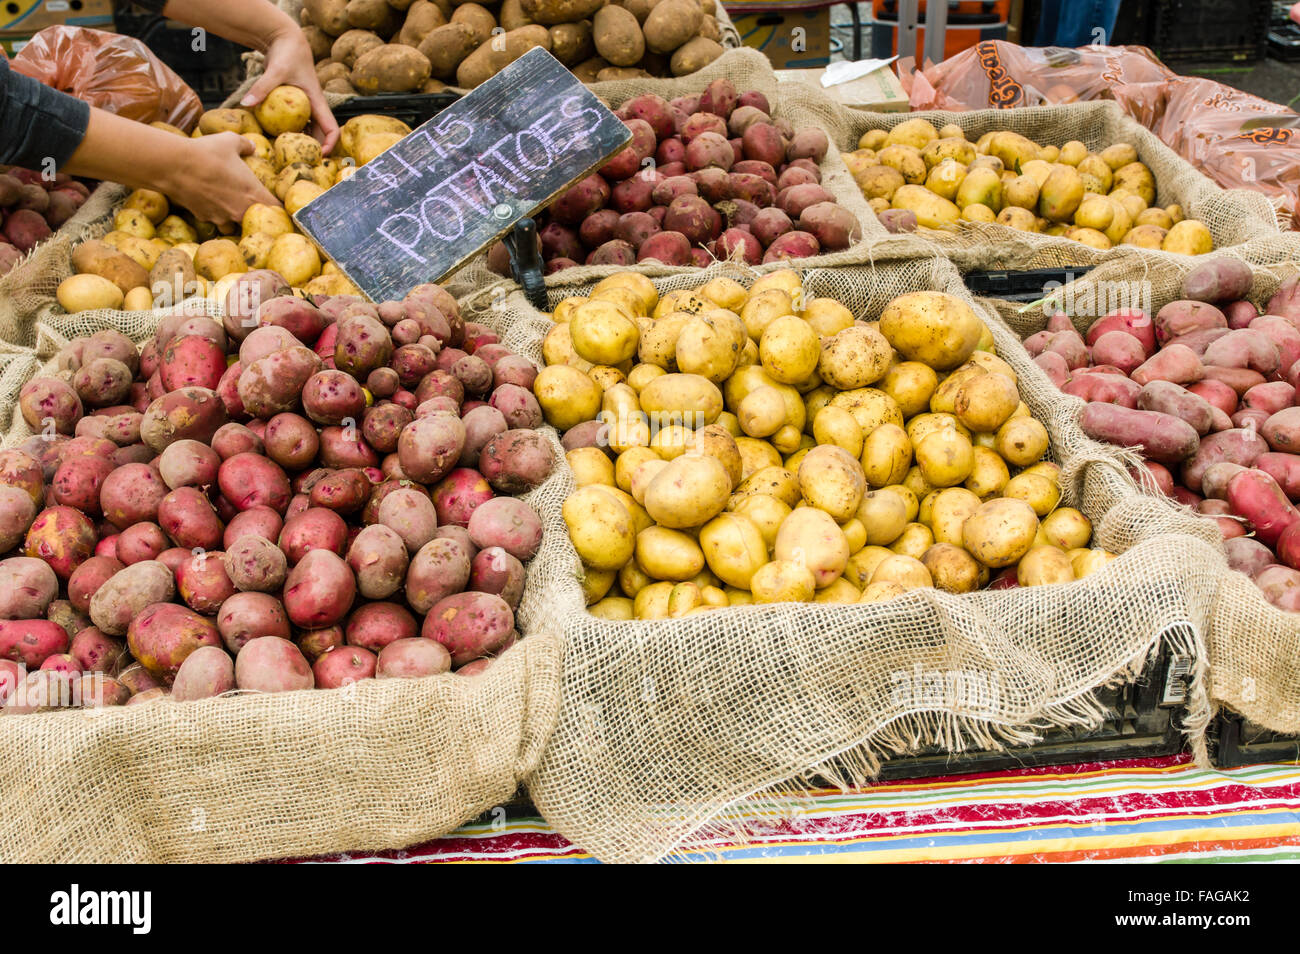 Display of red and white potatoes in burlap bins at a farmer's market in Beaverton, Oregon, USA Stock Photo